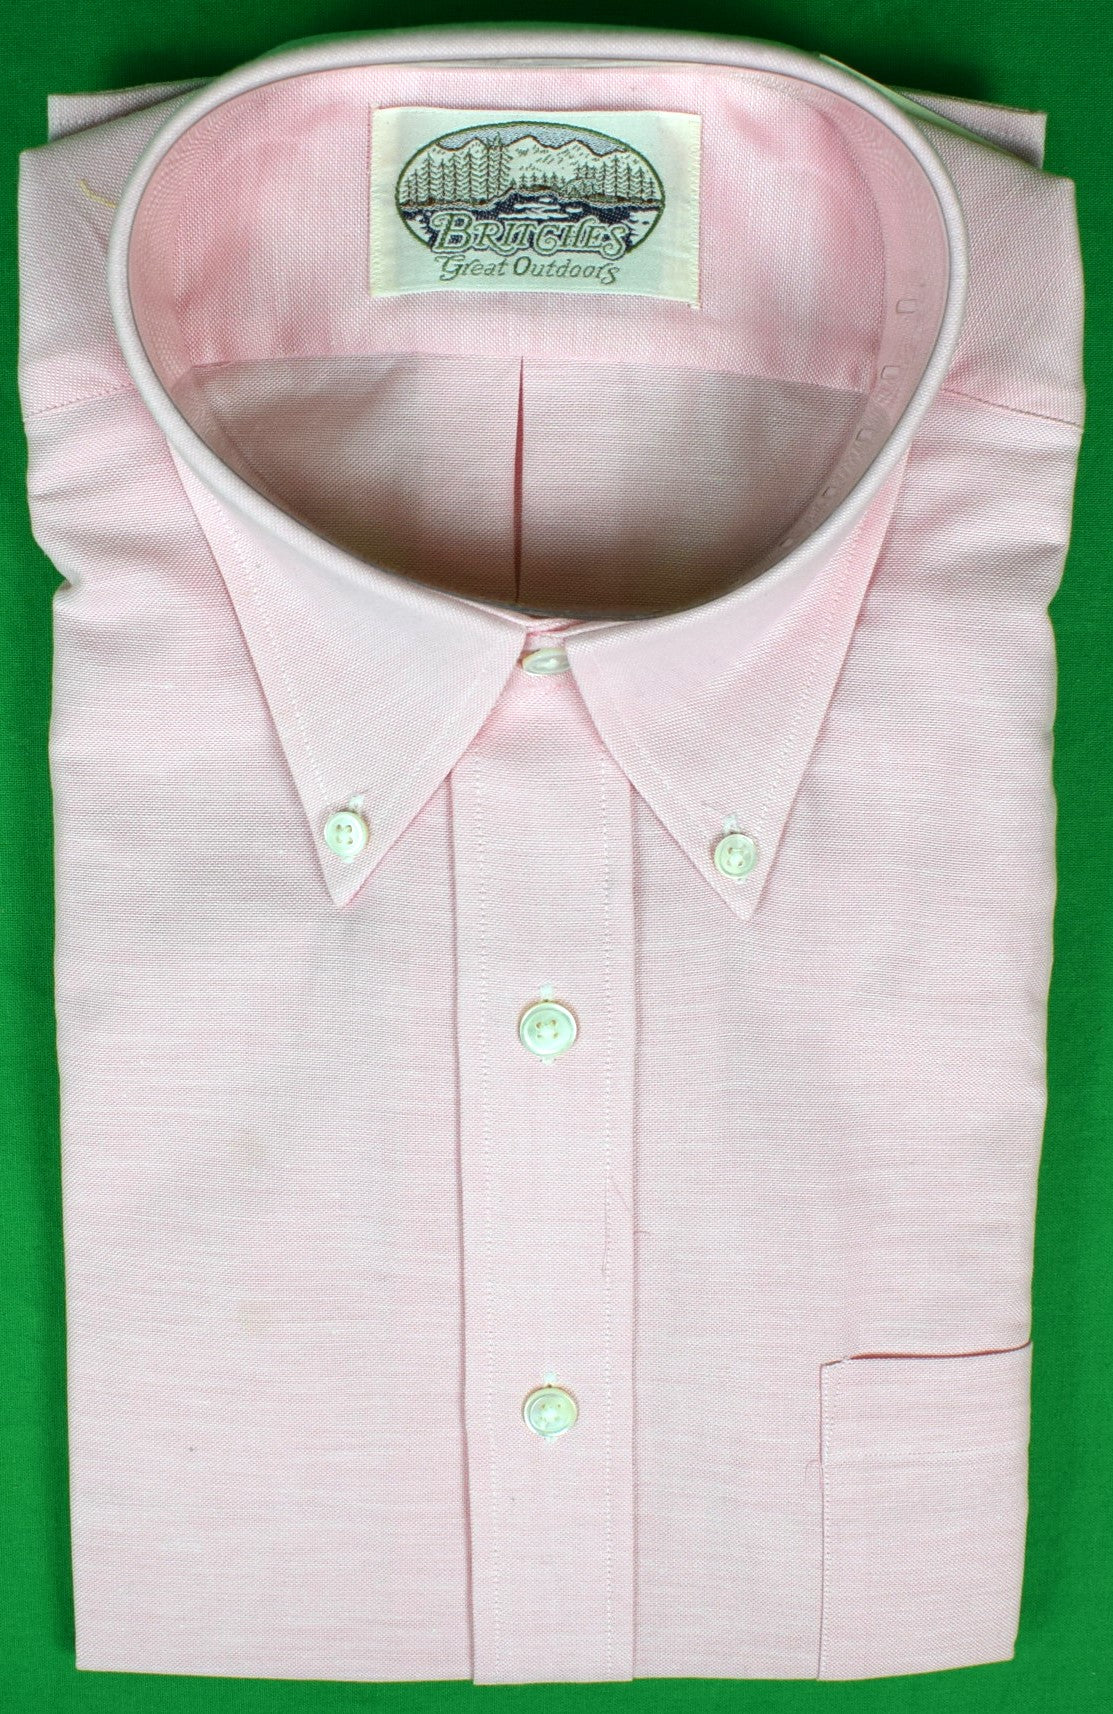 Britches Georgetowne Great Outdoors Pink OCBD Shirt Sz 16-33 (Deadstock w/ Tag)